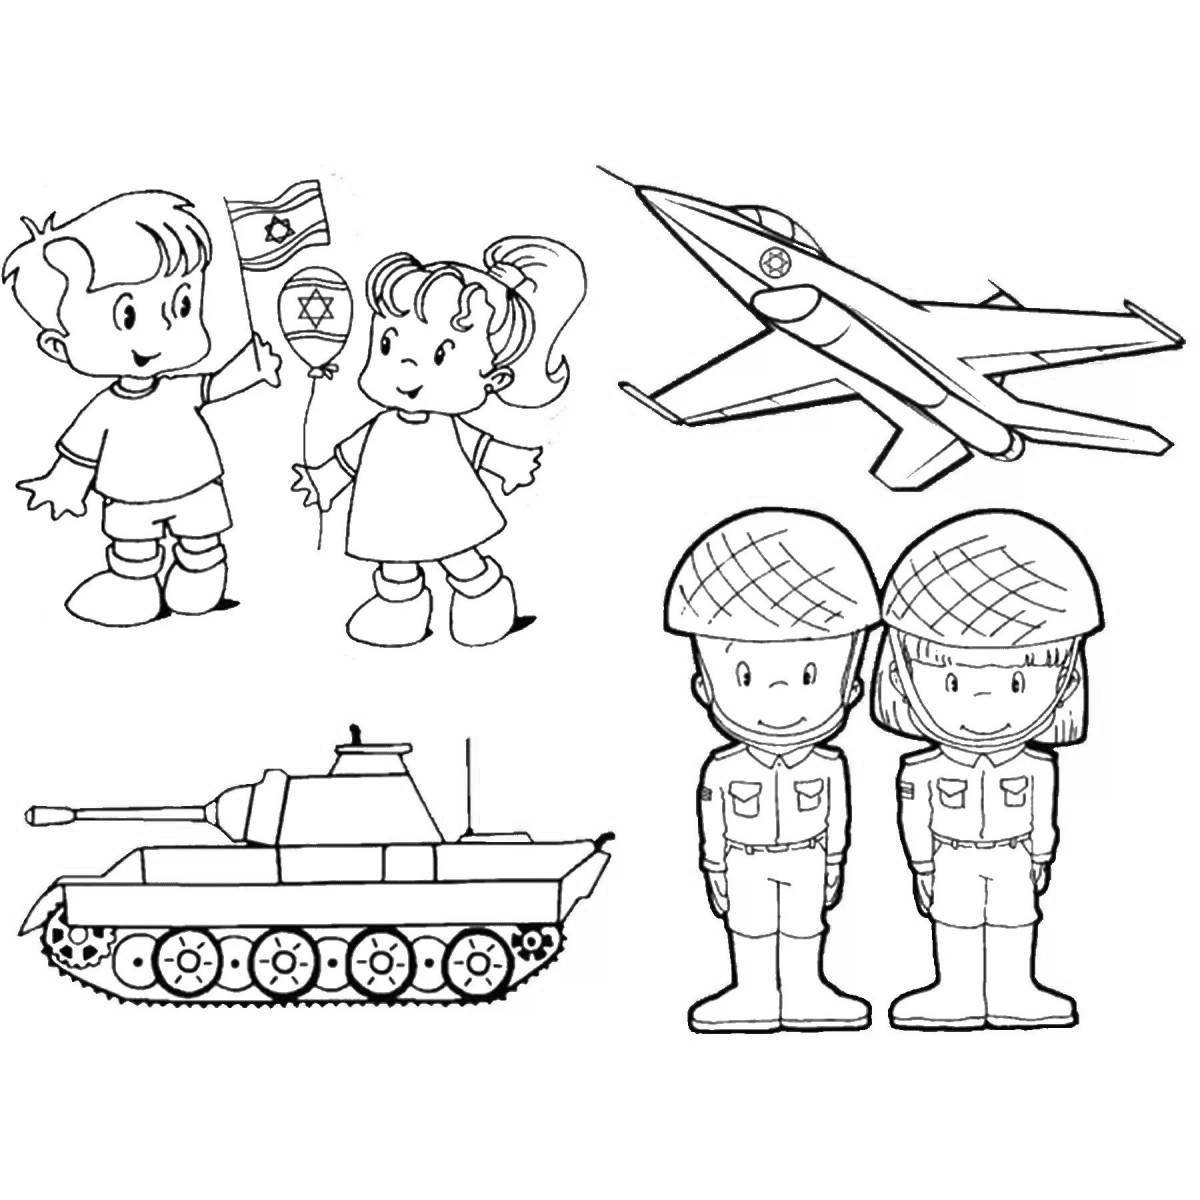 Attractive tanker coloring book for kids